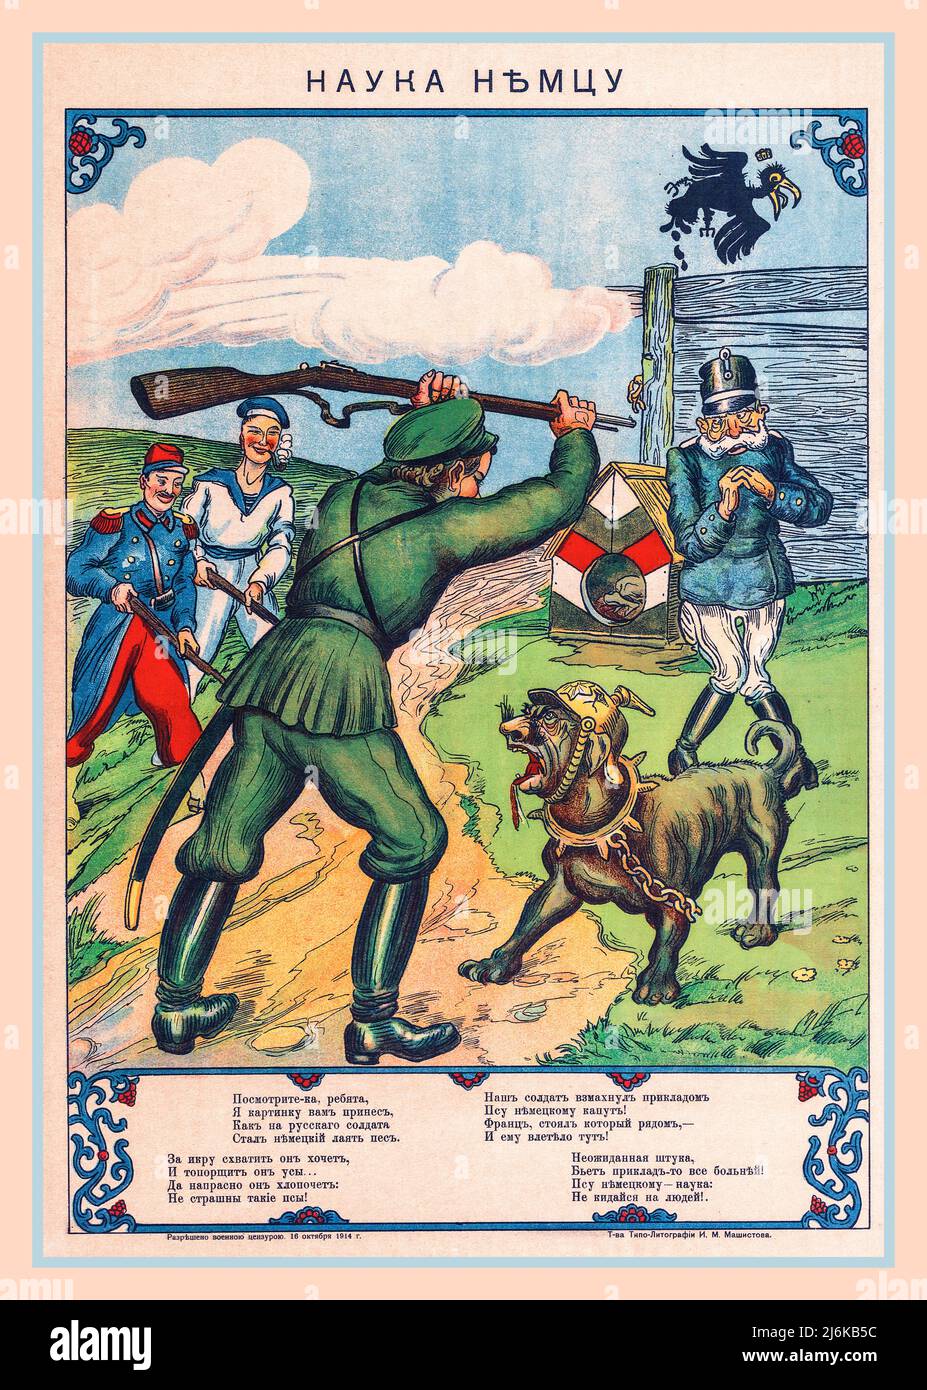 Vintage Russian 1914 Propaganda Poster. 'Наука Немцу' (The Germans a lesson).(c1914). propaganda poster in Lubok typical style. A Russian soldier beating a watchdog with the facial features of the German Emperor Wilhelm II., The Austrian Emperor Franz Josef is shivering with fear in the background. British and French soldiers laughing behind. WW1 First World War The Great War Stock Photo